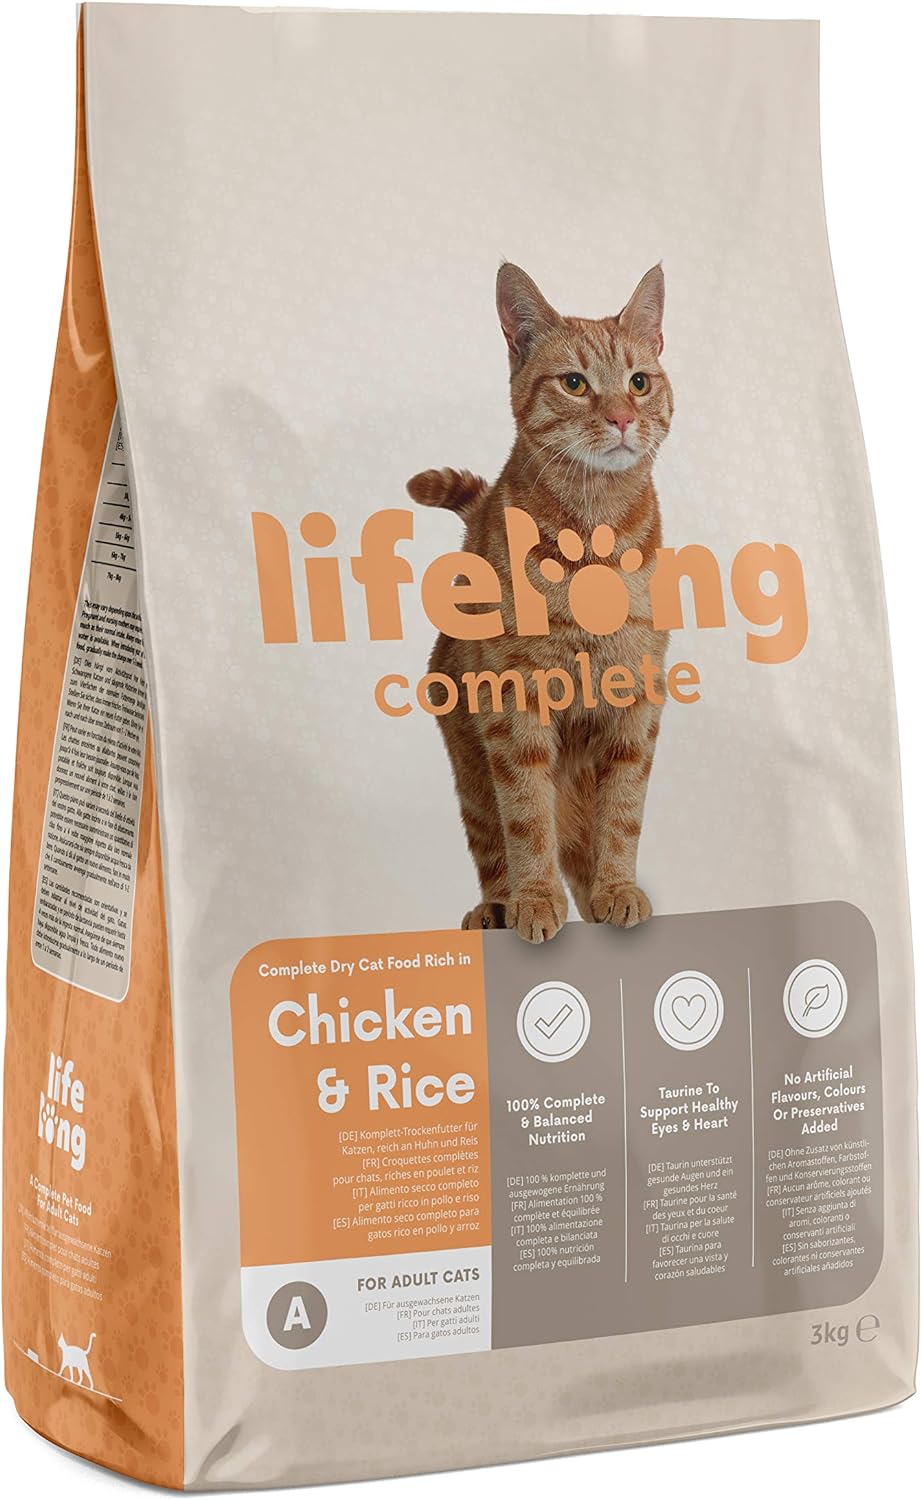 Amazon Brand - Lifelong - Complete Dry Cat Food Rich in Chicken & Rice for Adult Cats, 1 Pack of 3 kg?5400606003507